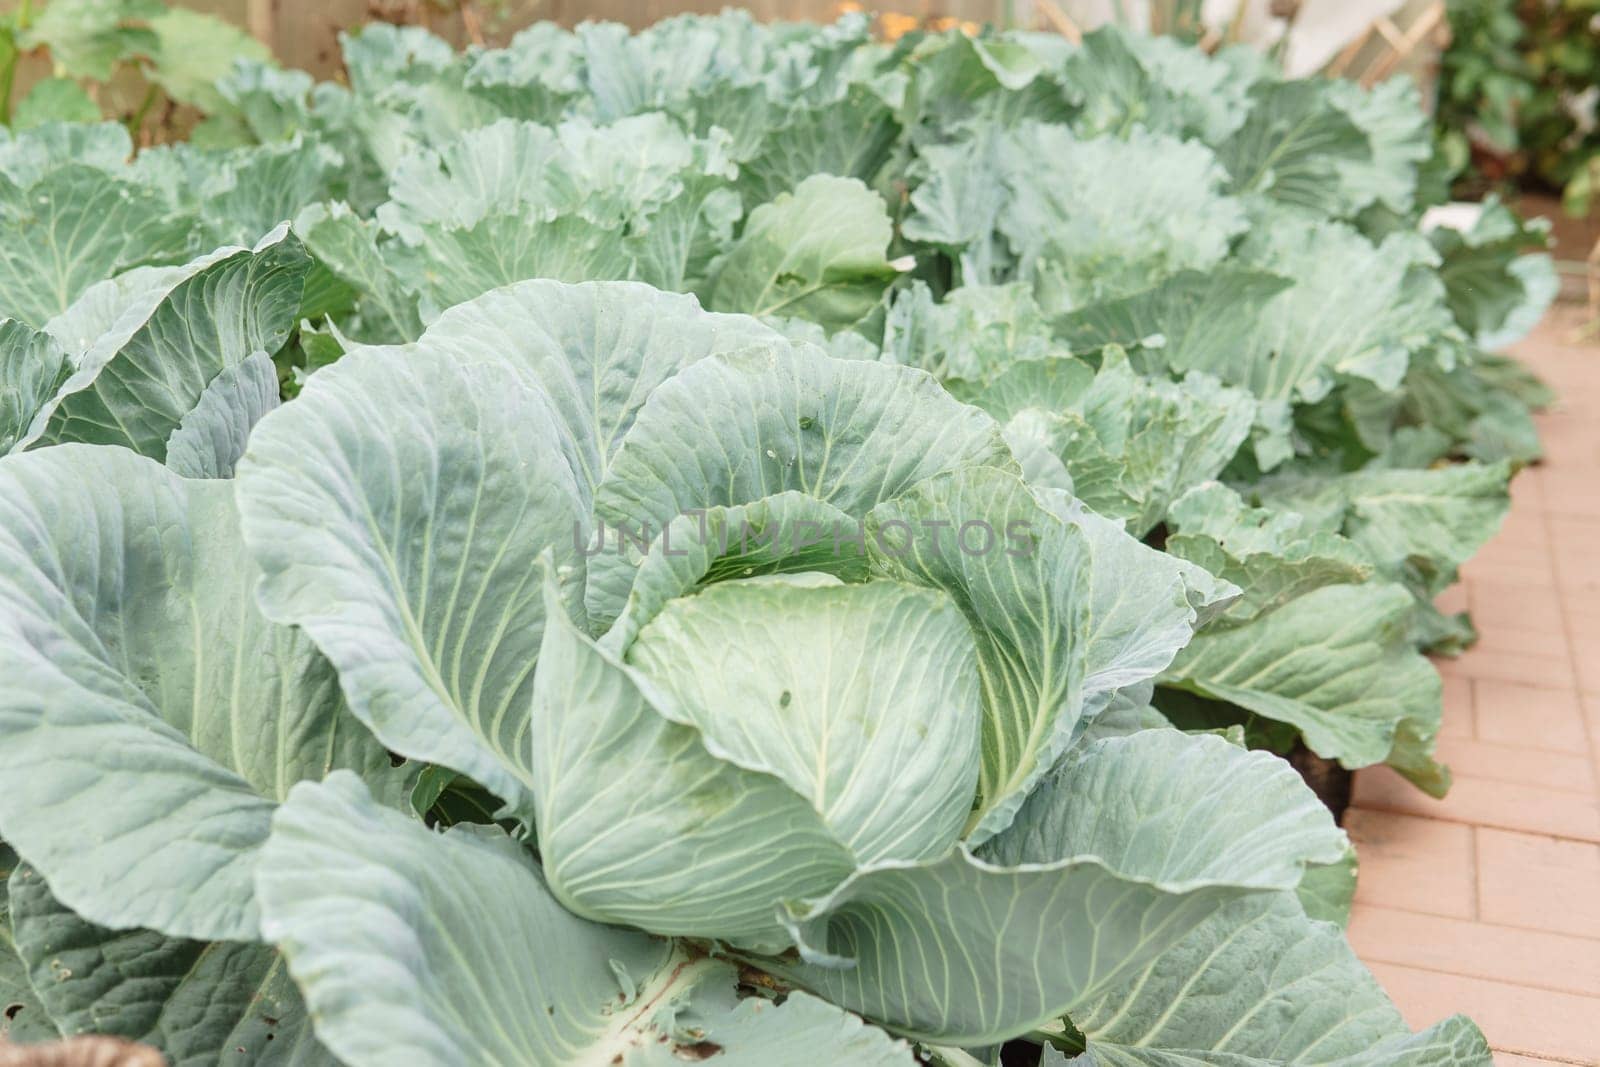 Cabbage grows in the garden. Harvesting cabbage. Life in the village